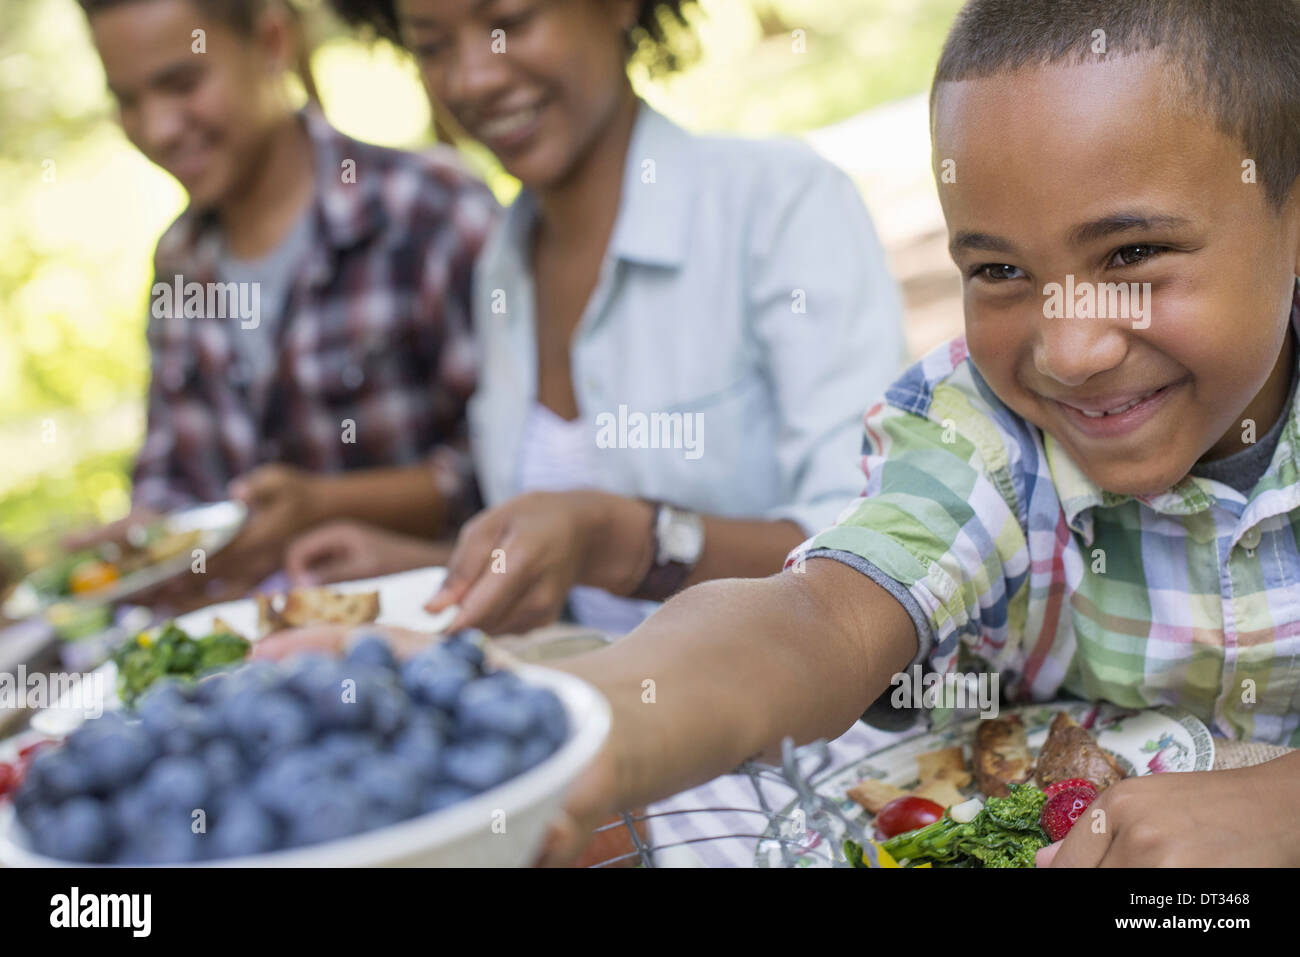 A family picnic in a shady woodland Adults and children sitting at a table Stock Photo